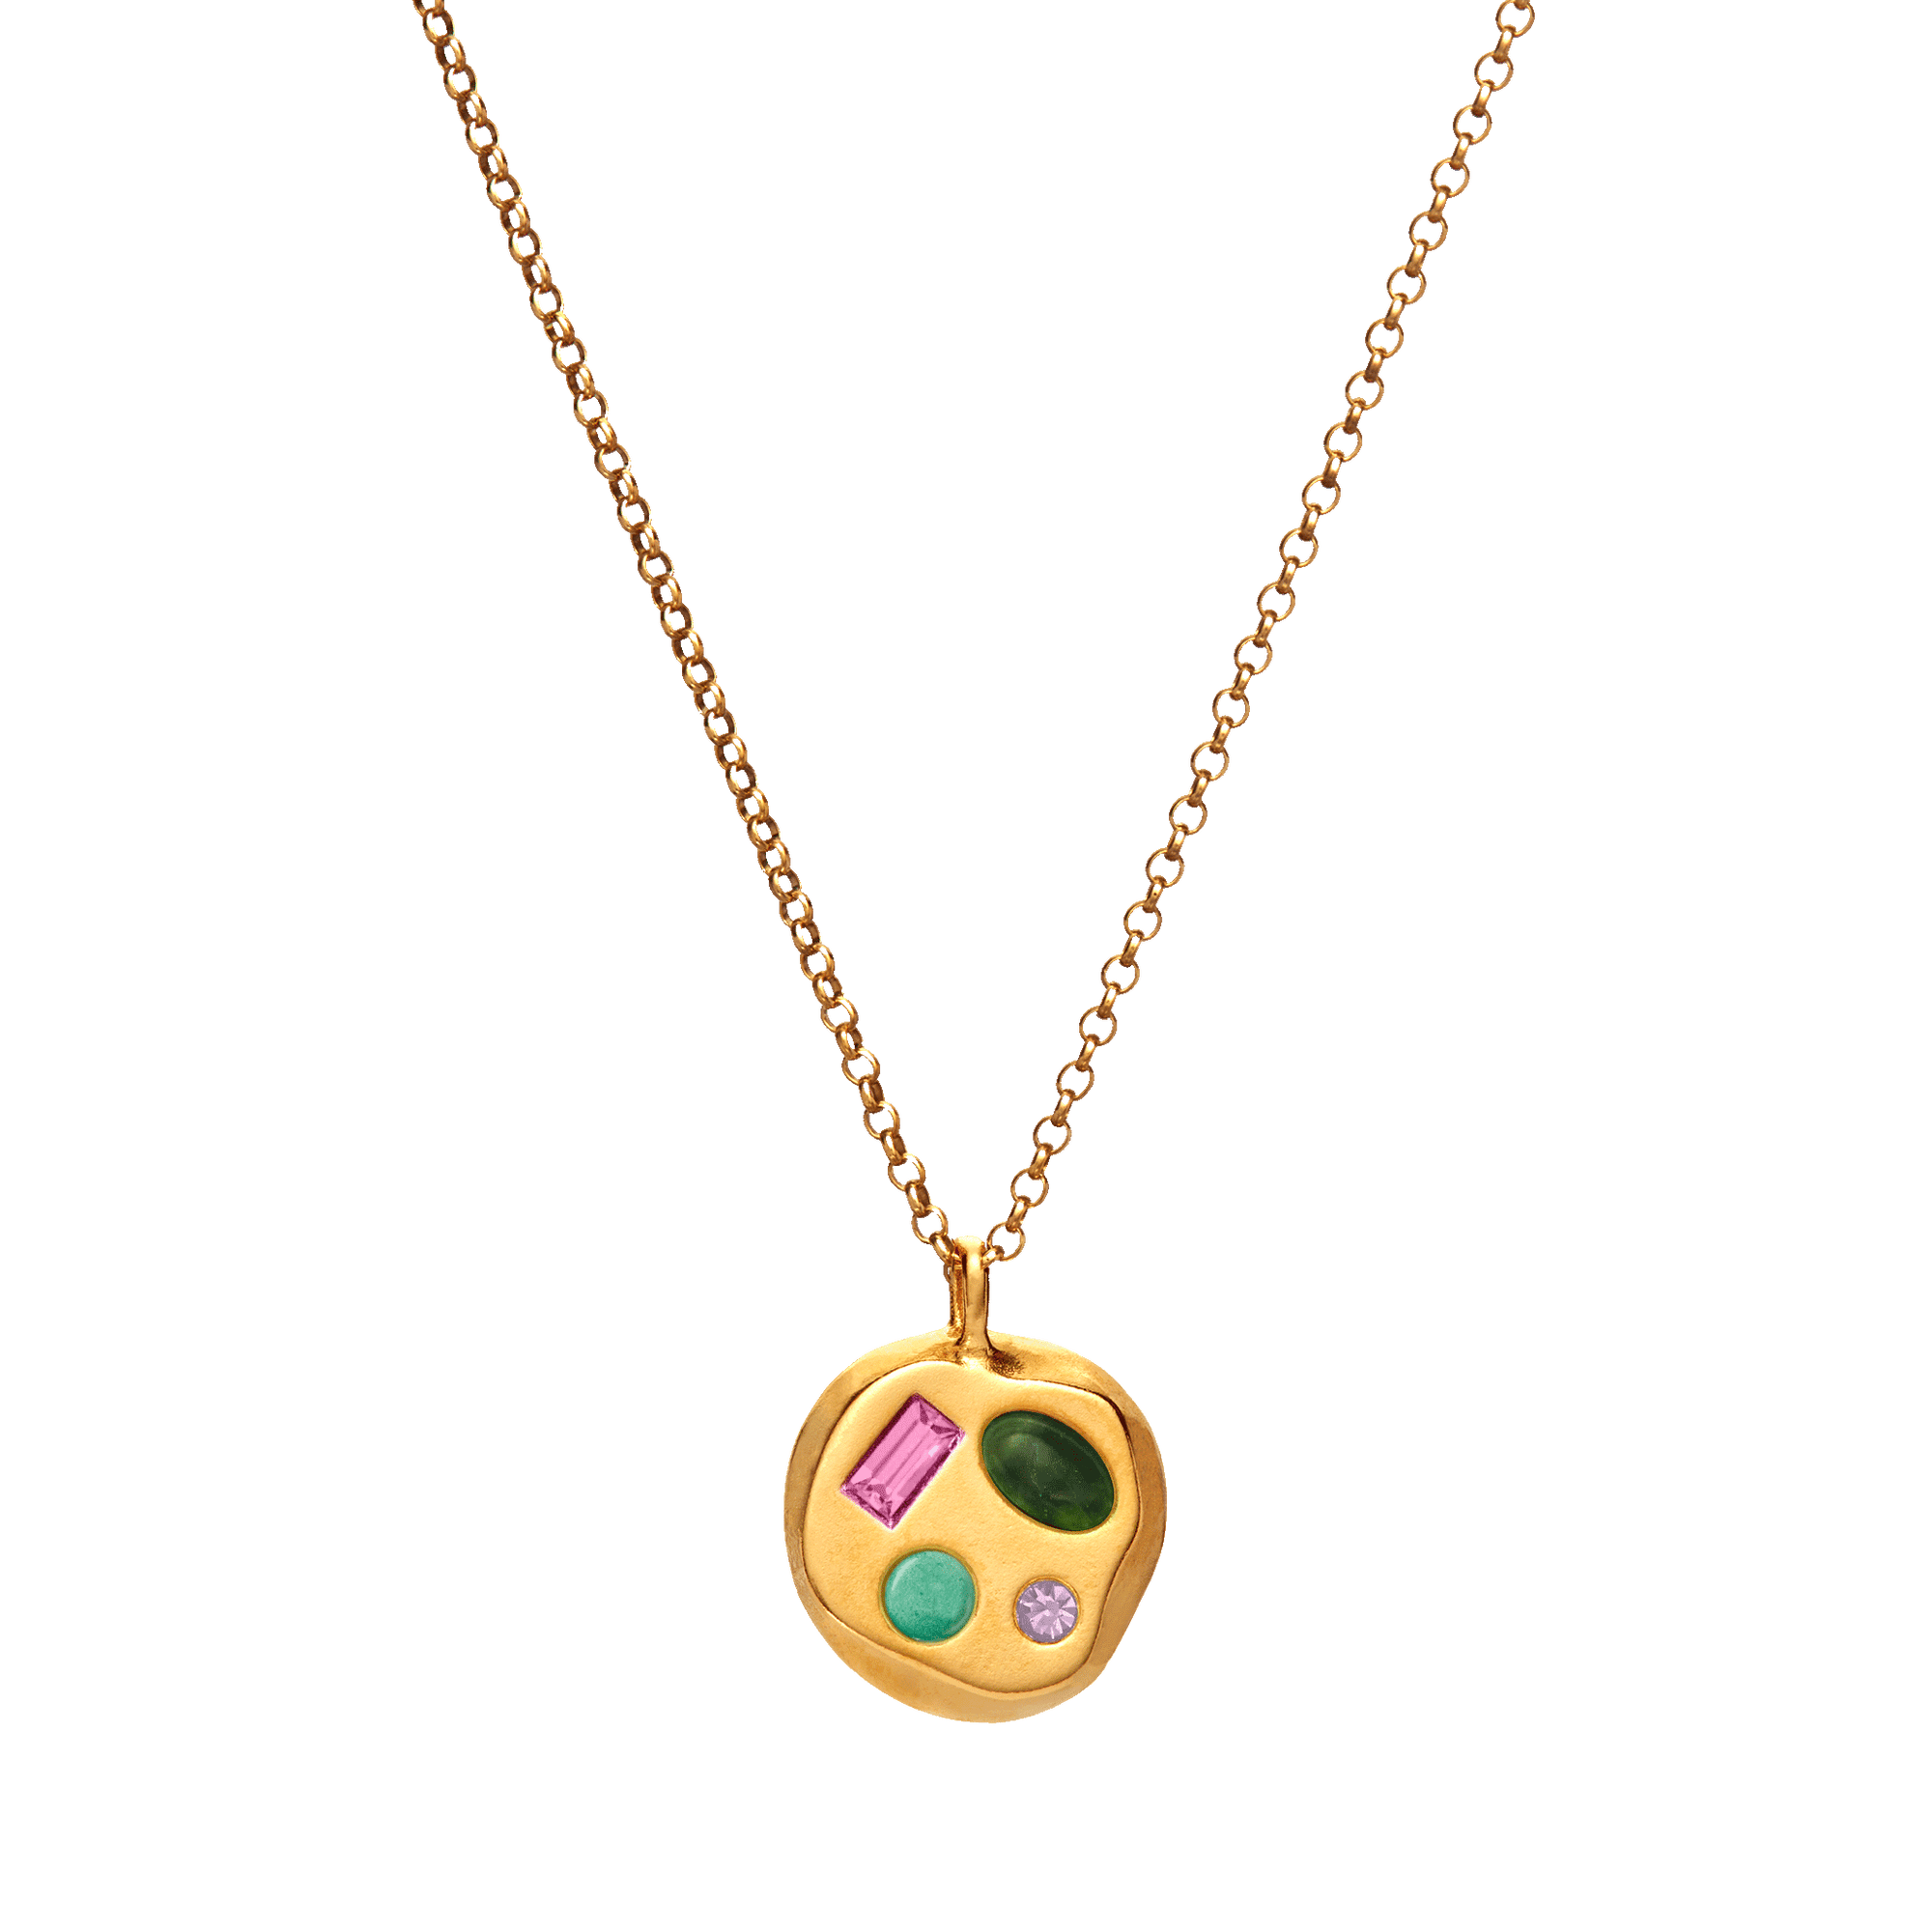 The October Ninth Pendant